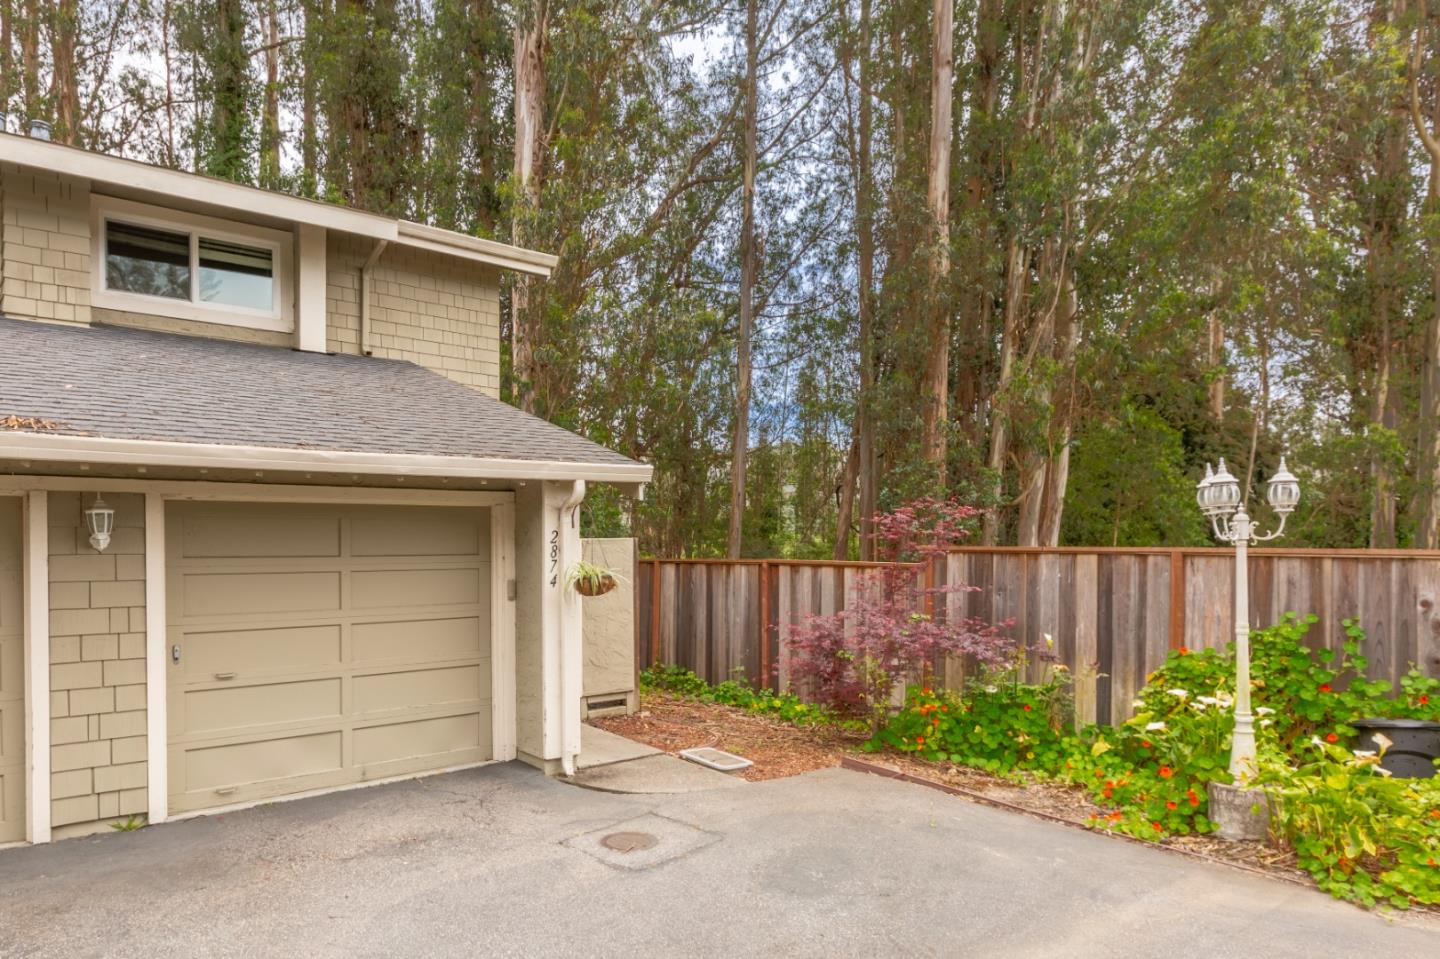 Photo of 2874 Lindsay Ln in Soquel, CA